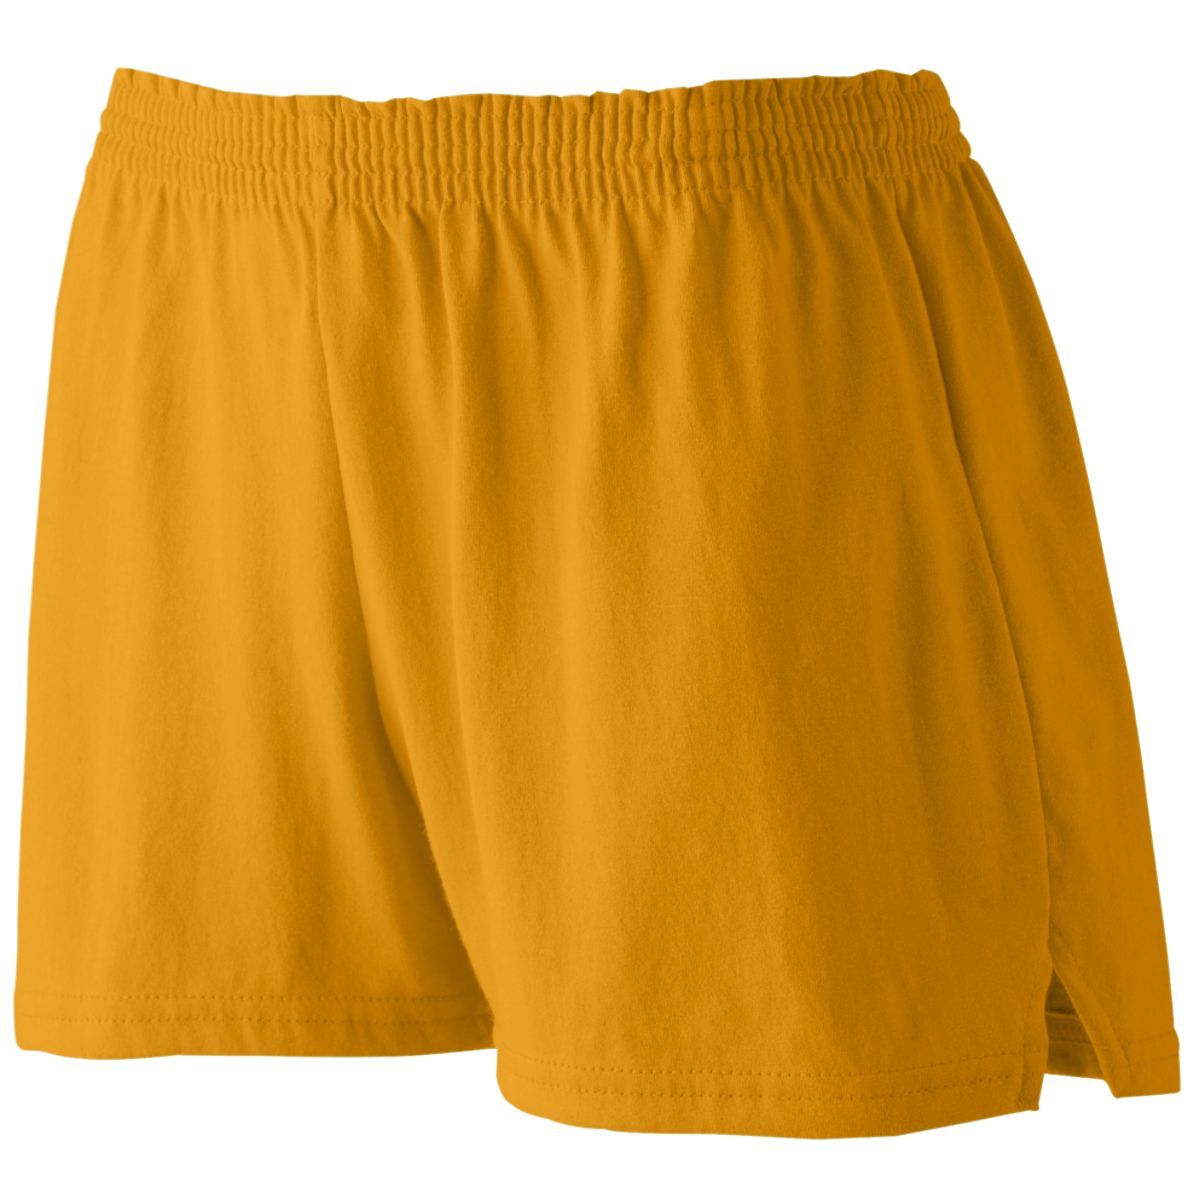 Augusta Sportswear Girls Jersey Shorts in Gold  -Part of the Girls, Augusta-Products, Girls-Shorts product lines at KanaleyCreations.com